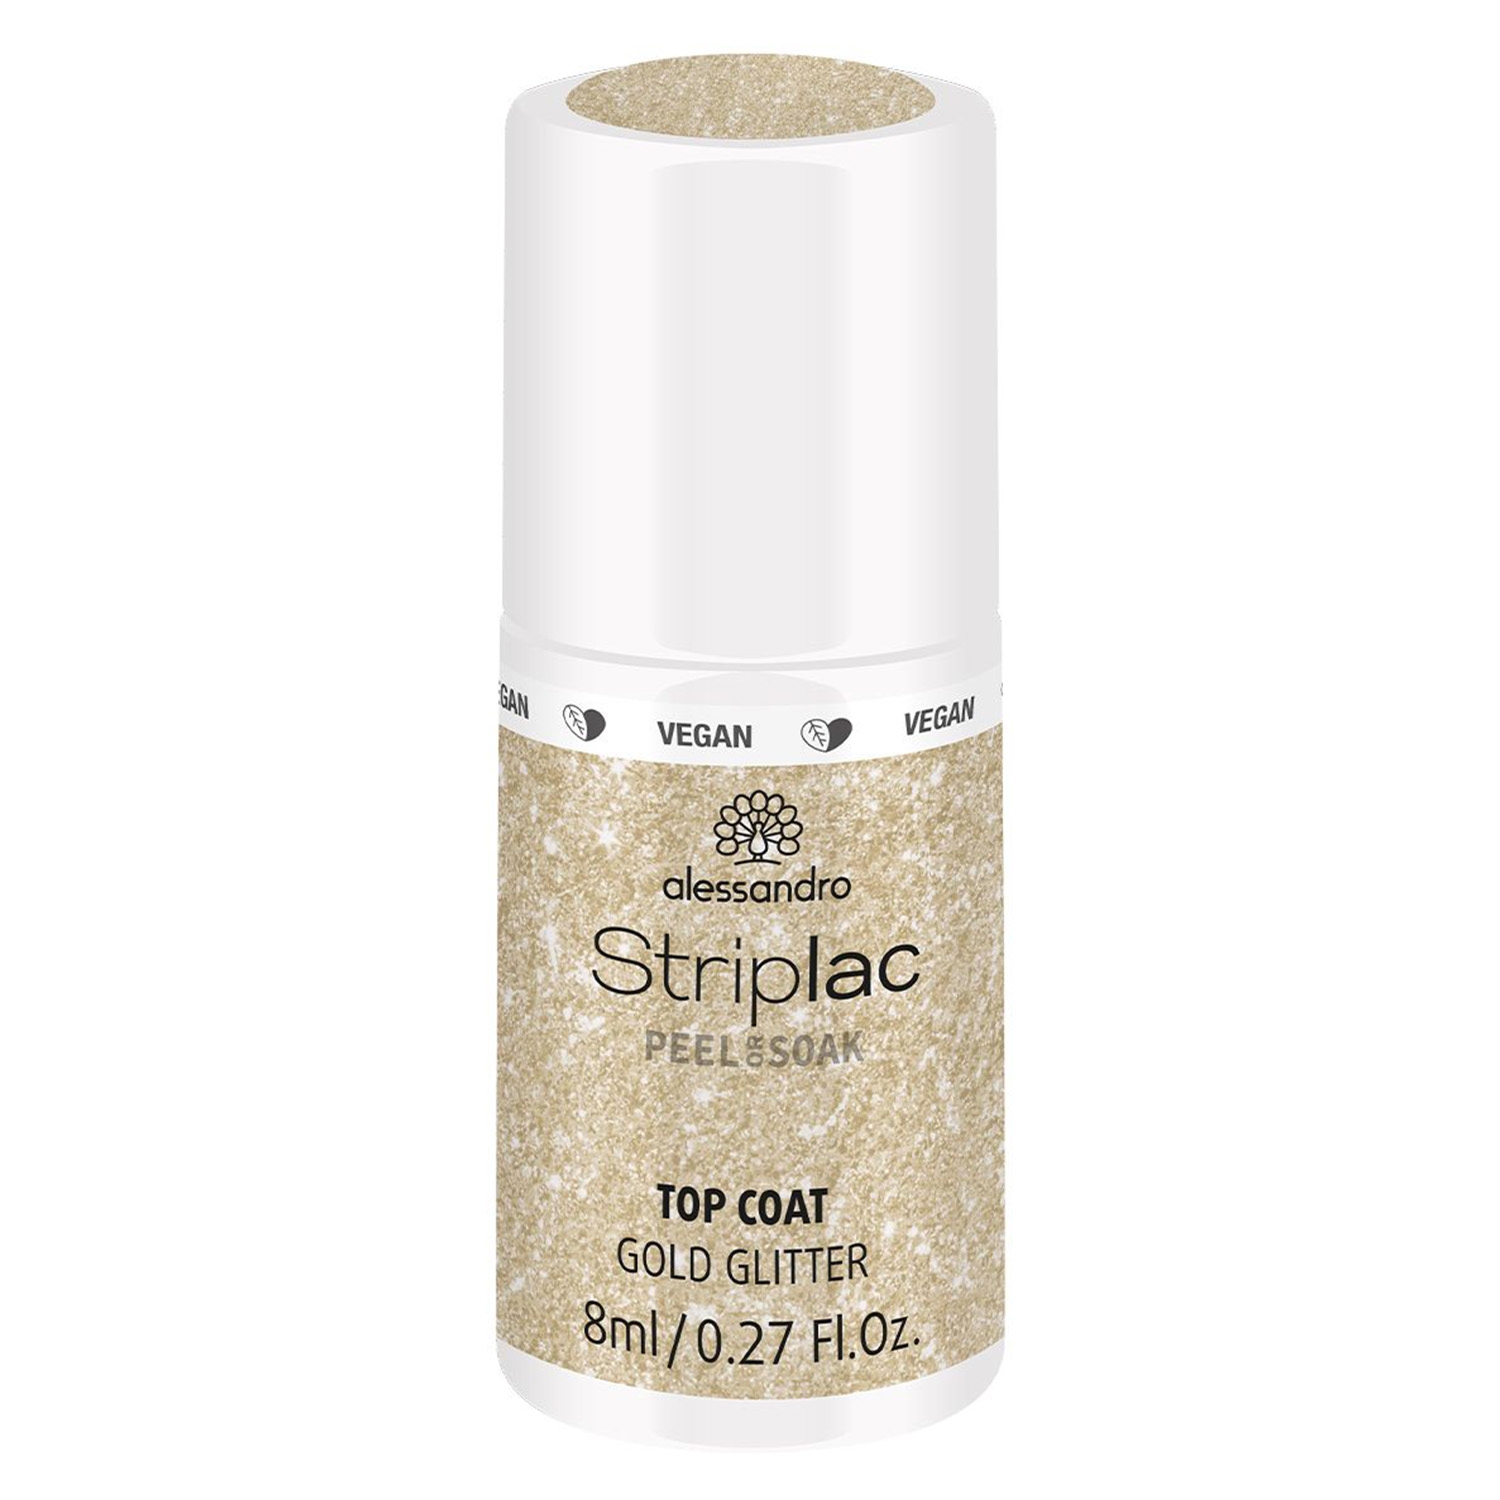 Product image from Striplac Peel or Soak - Top Coat Gold Glitter